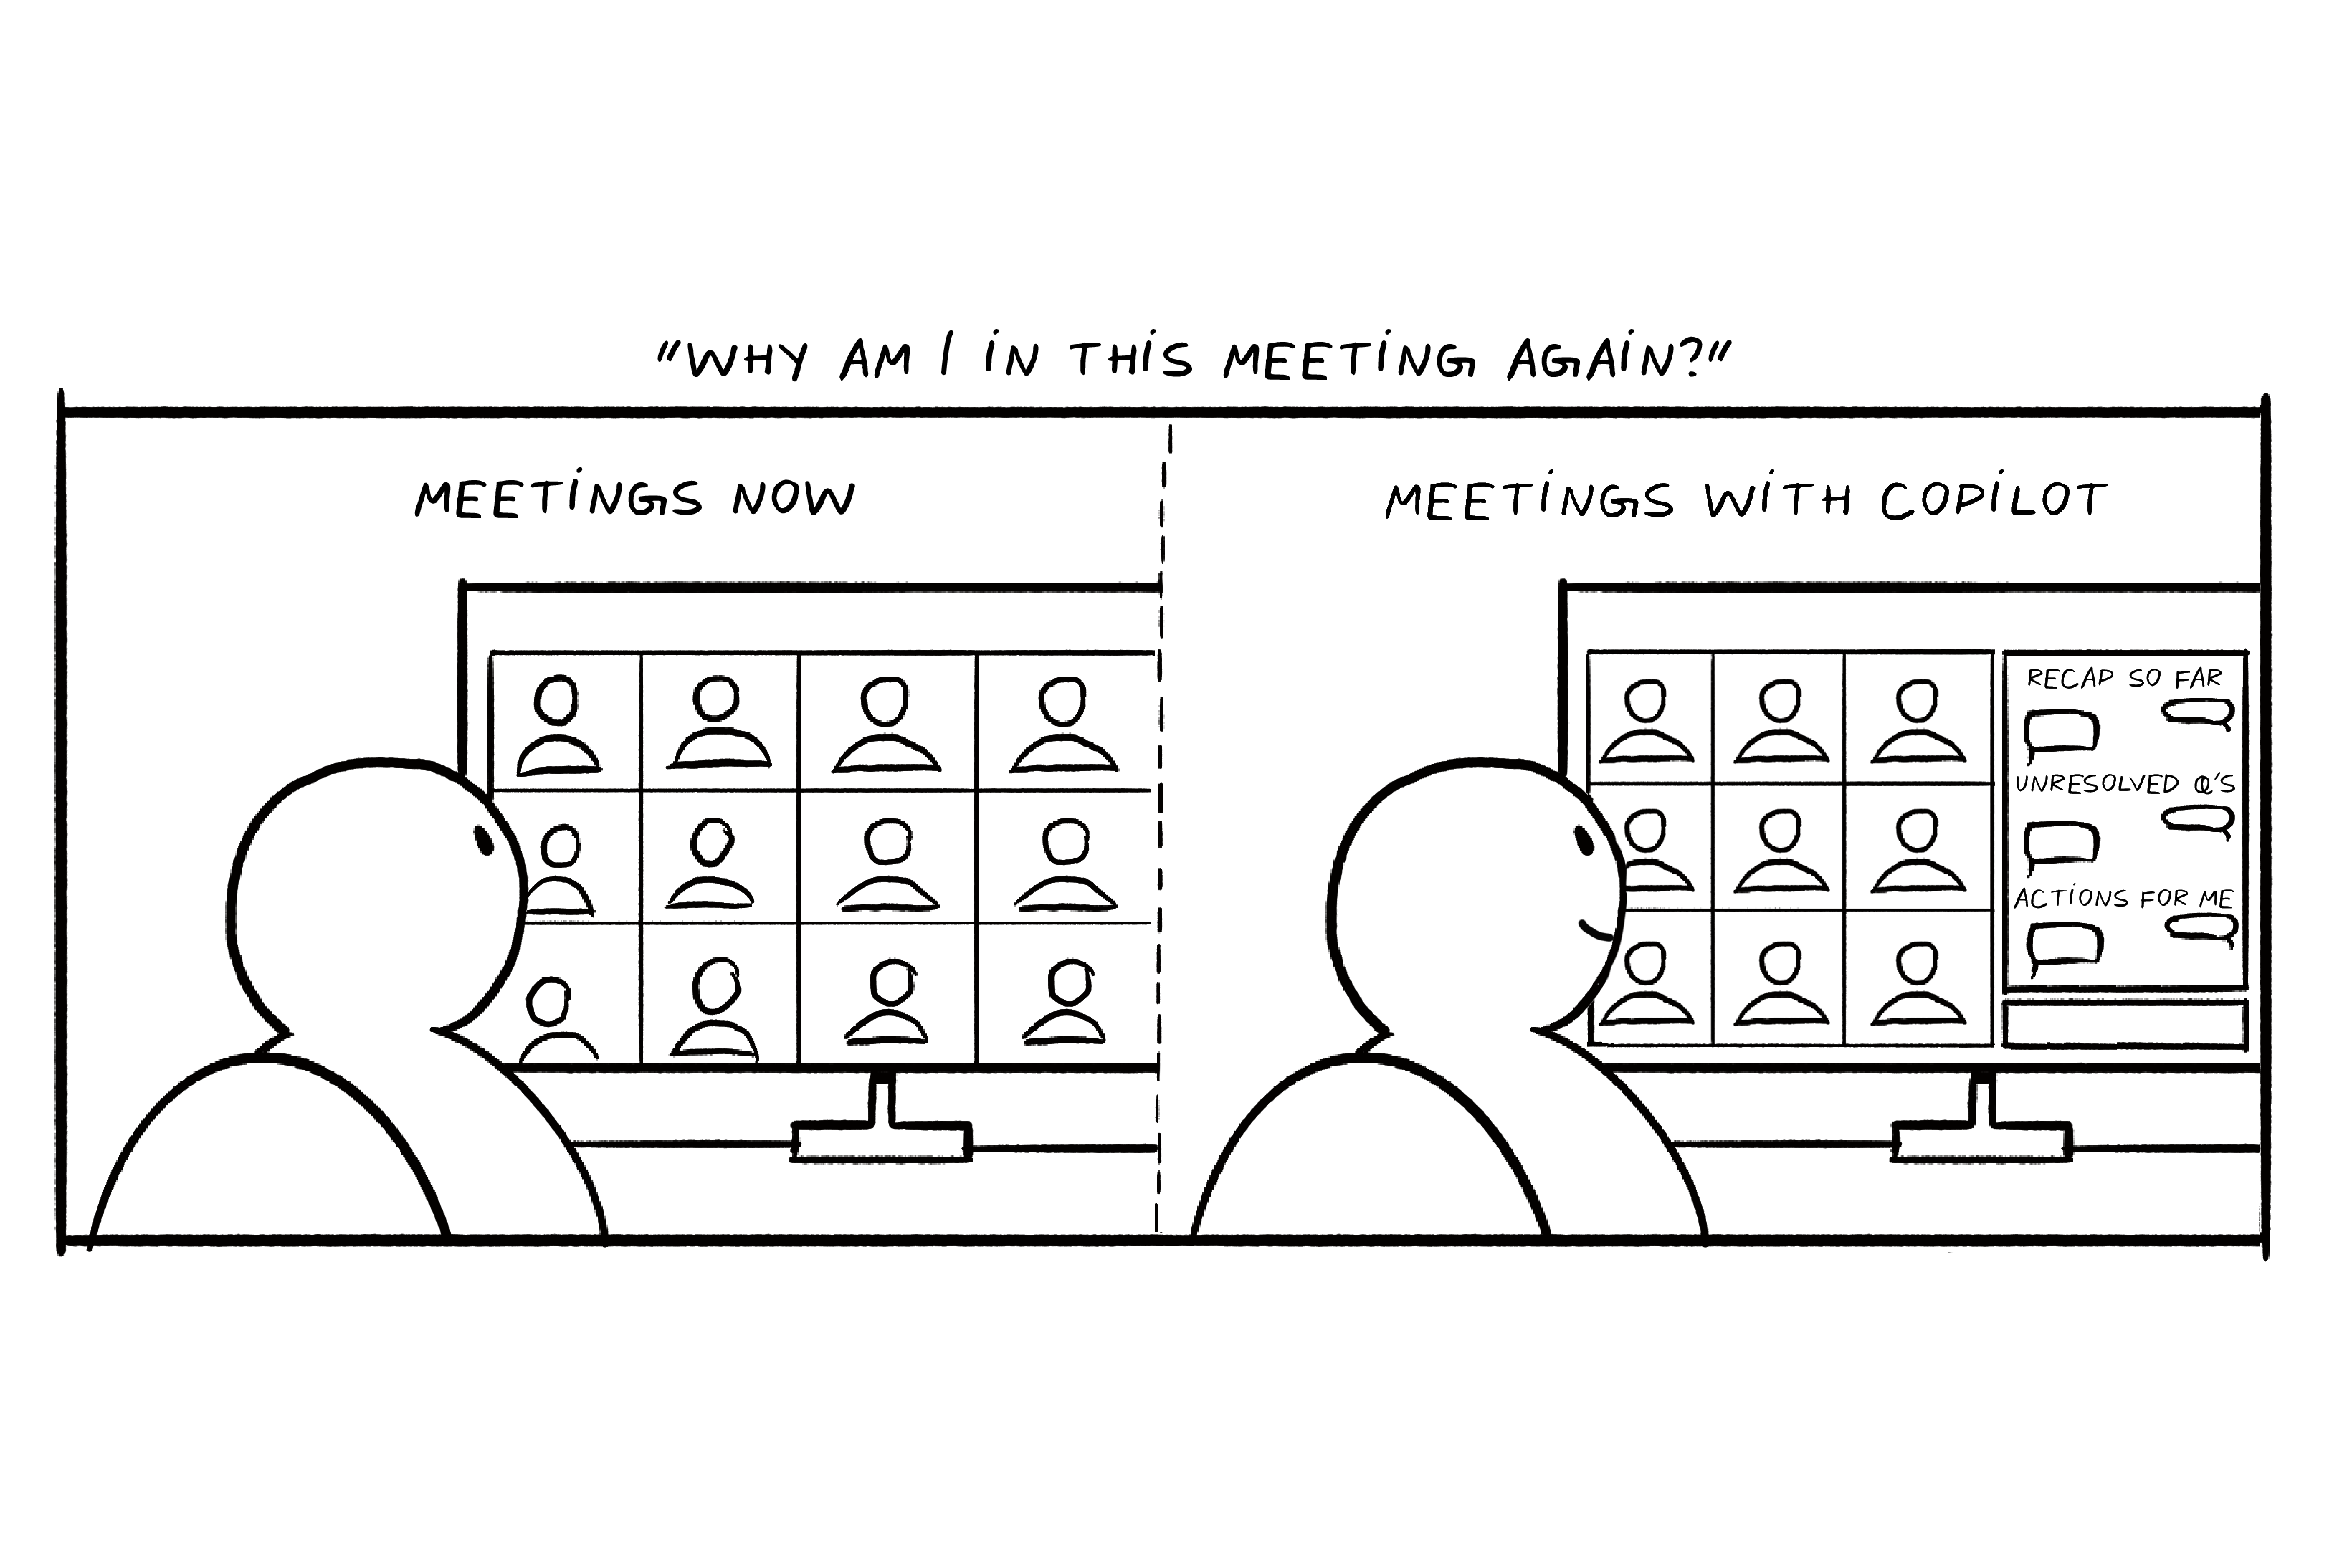 A black and white sketch of a person looking at their video chat grid on the left, titled “Meetings Without Copilot”. On the right, is a more dynamic interface labeled “Meetings with Copilot.”